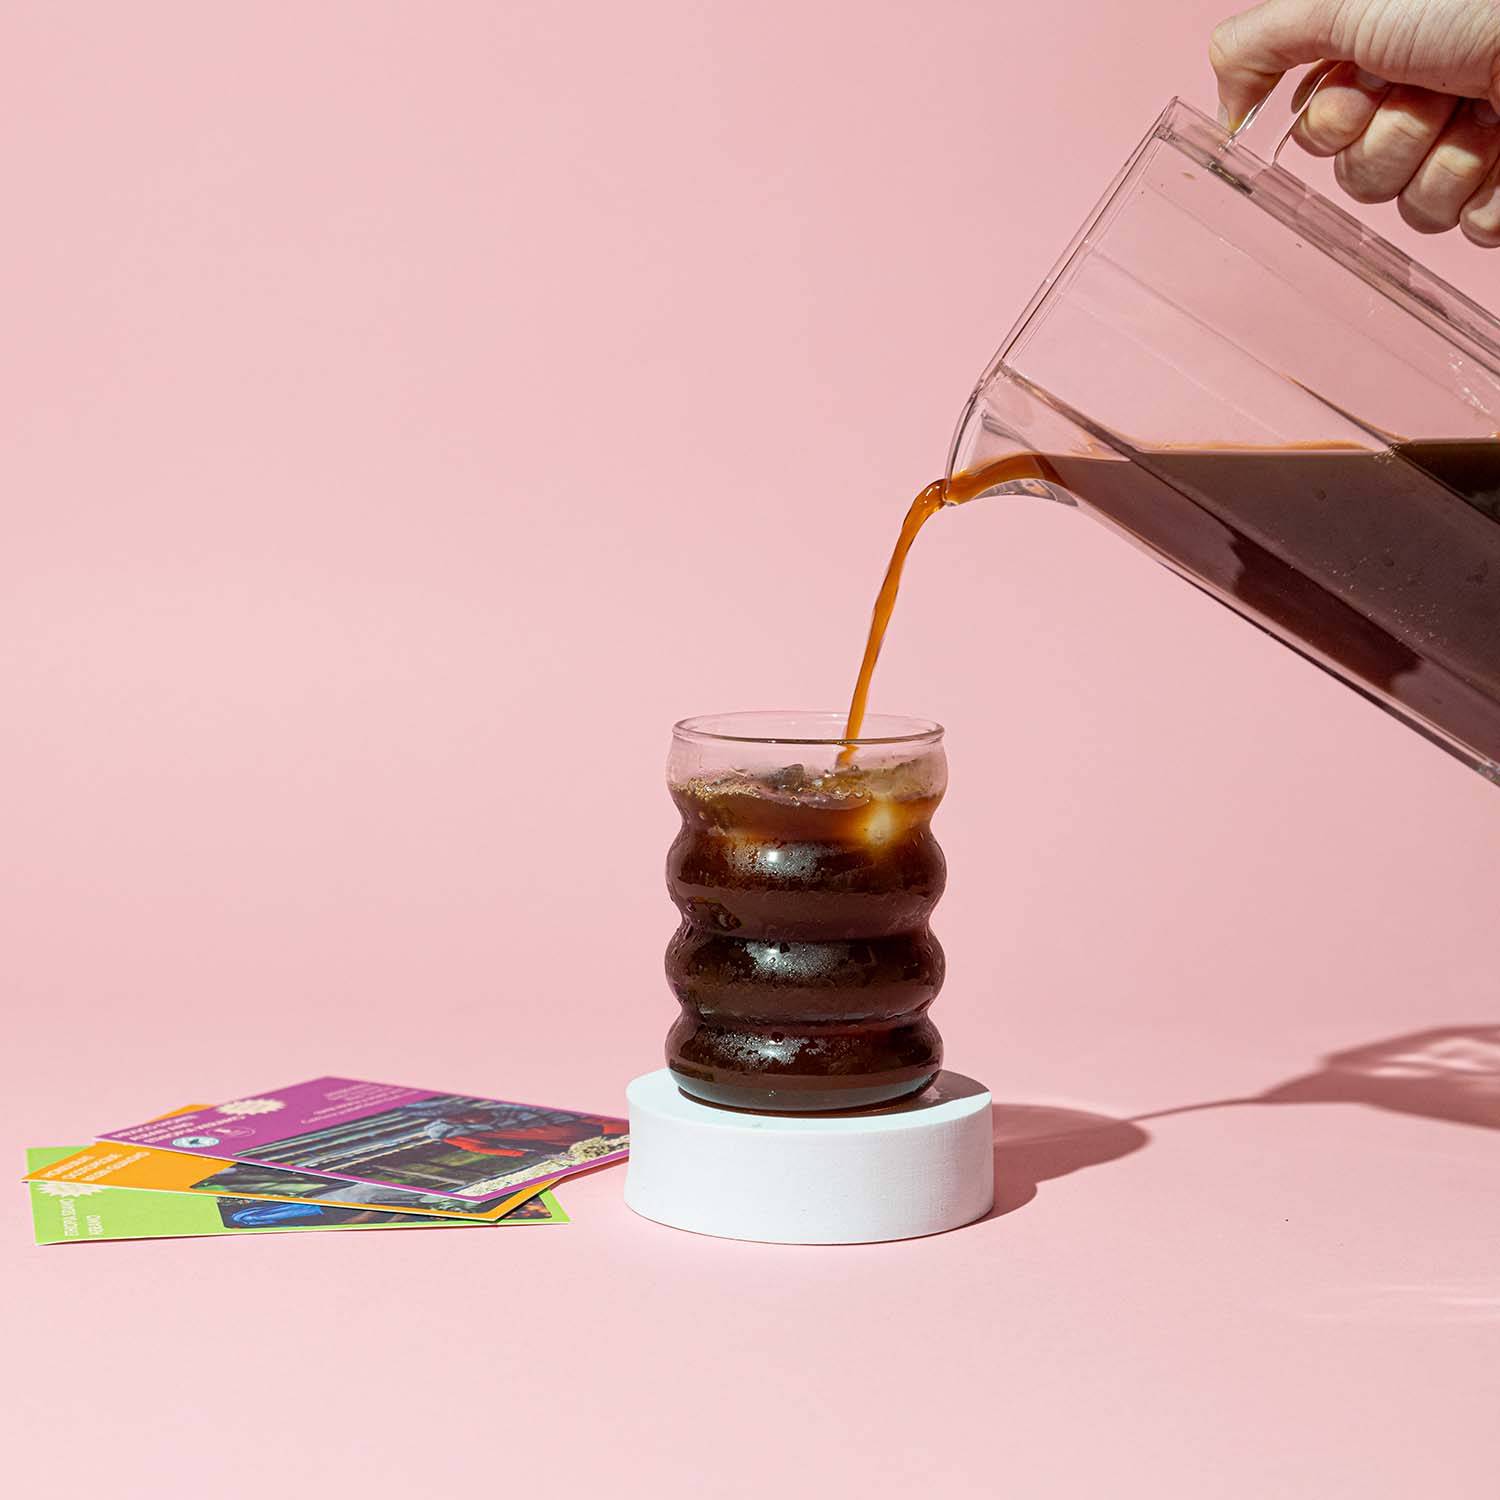 Cold brew kit makes rich, chocolatey cold brew